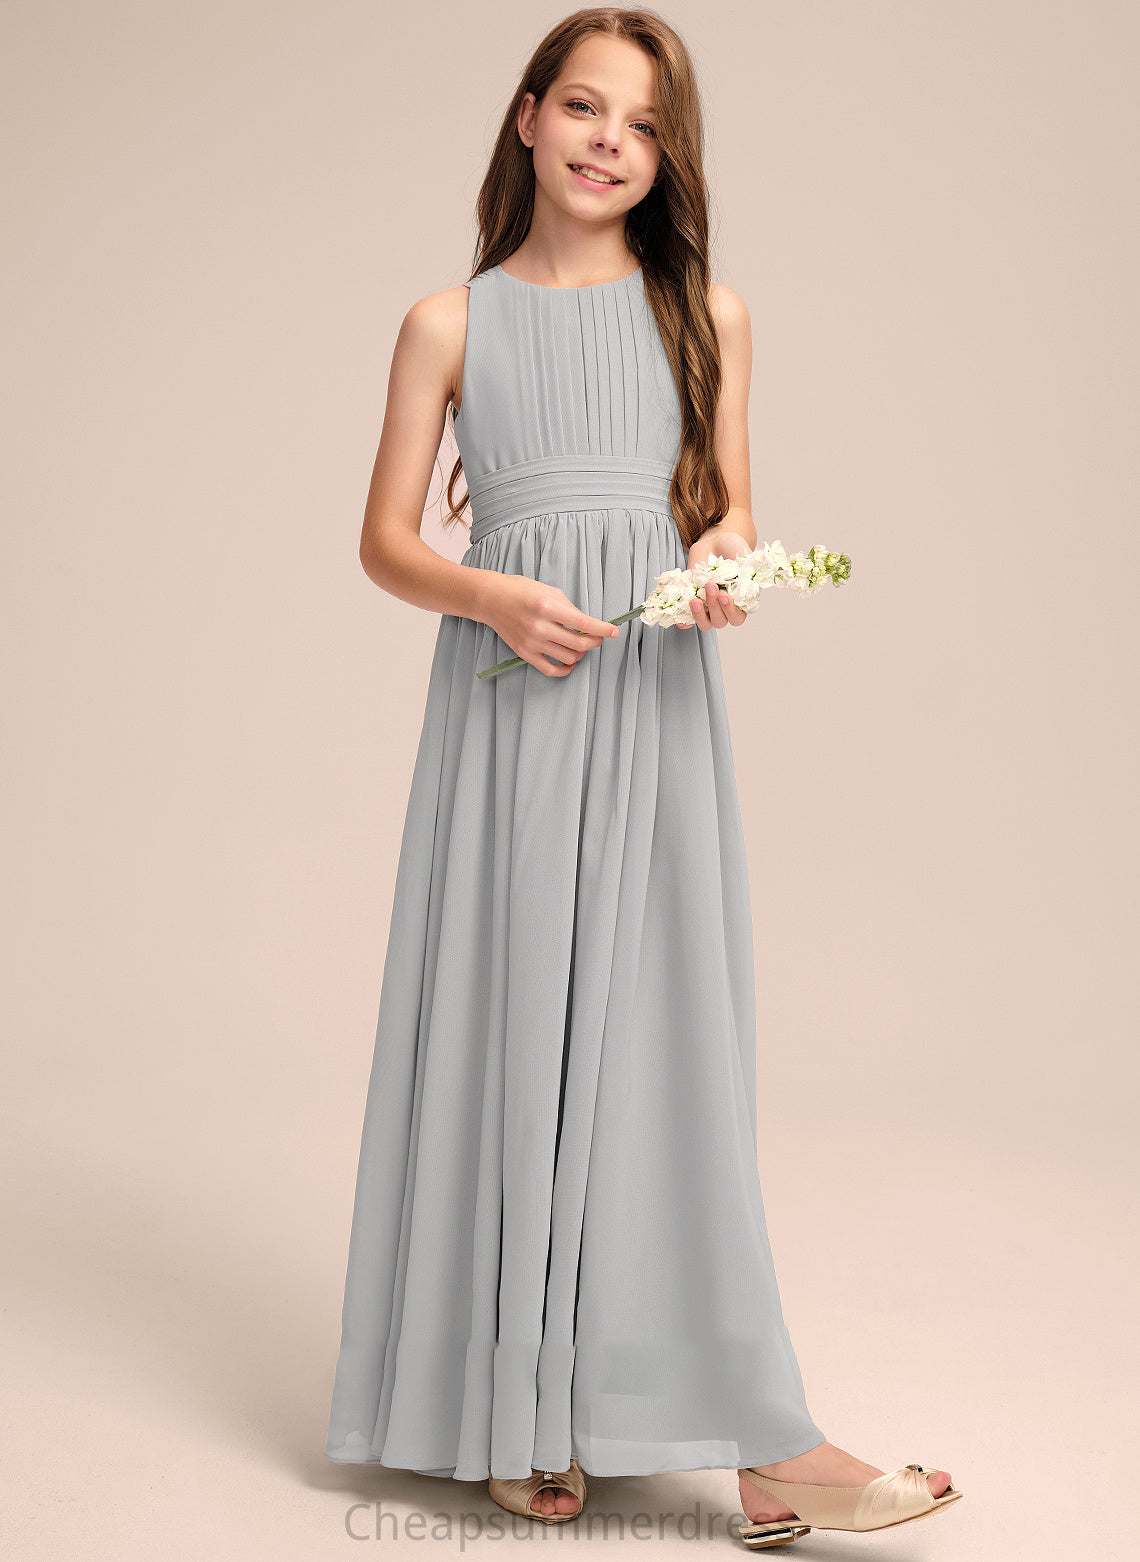 Junior Bridesmaid Dresses Lina Ruffle With Bow(s) Neck Chiffon Scoop Floor-Length A-Line